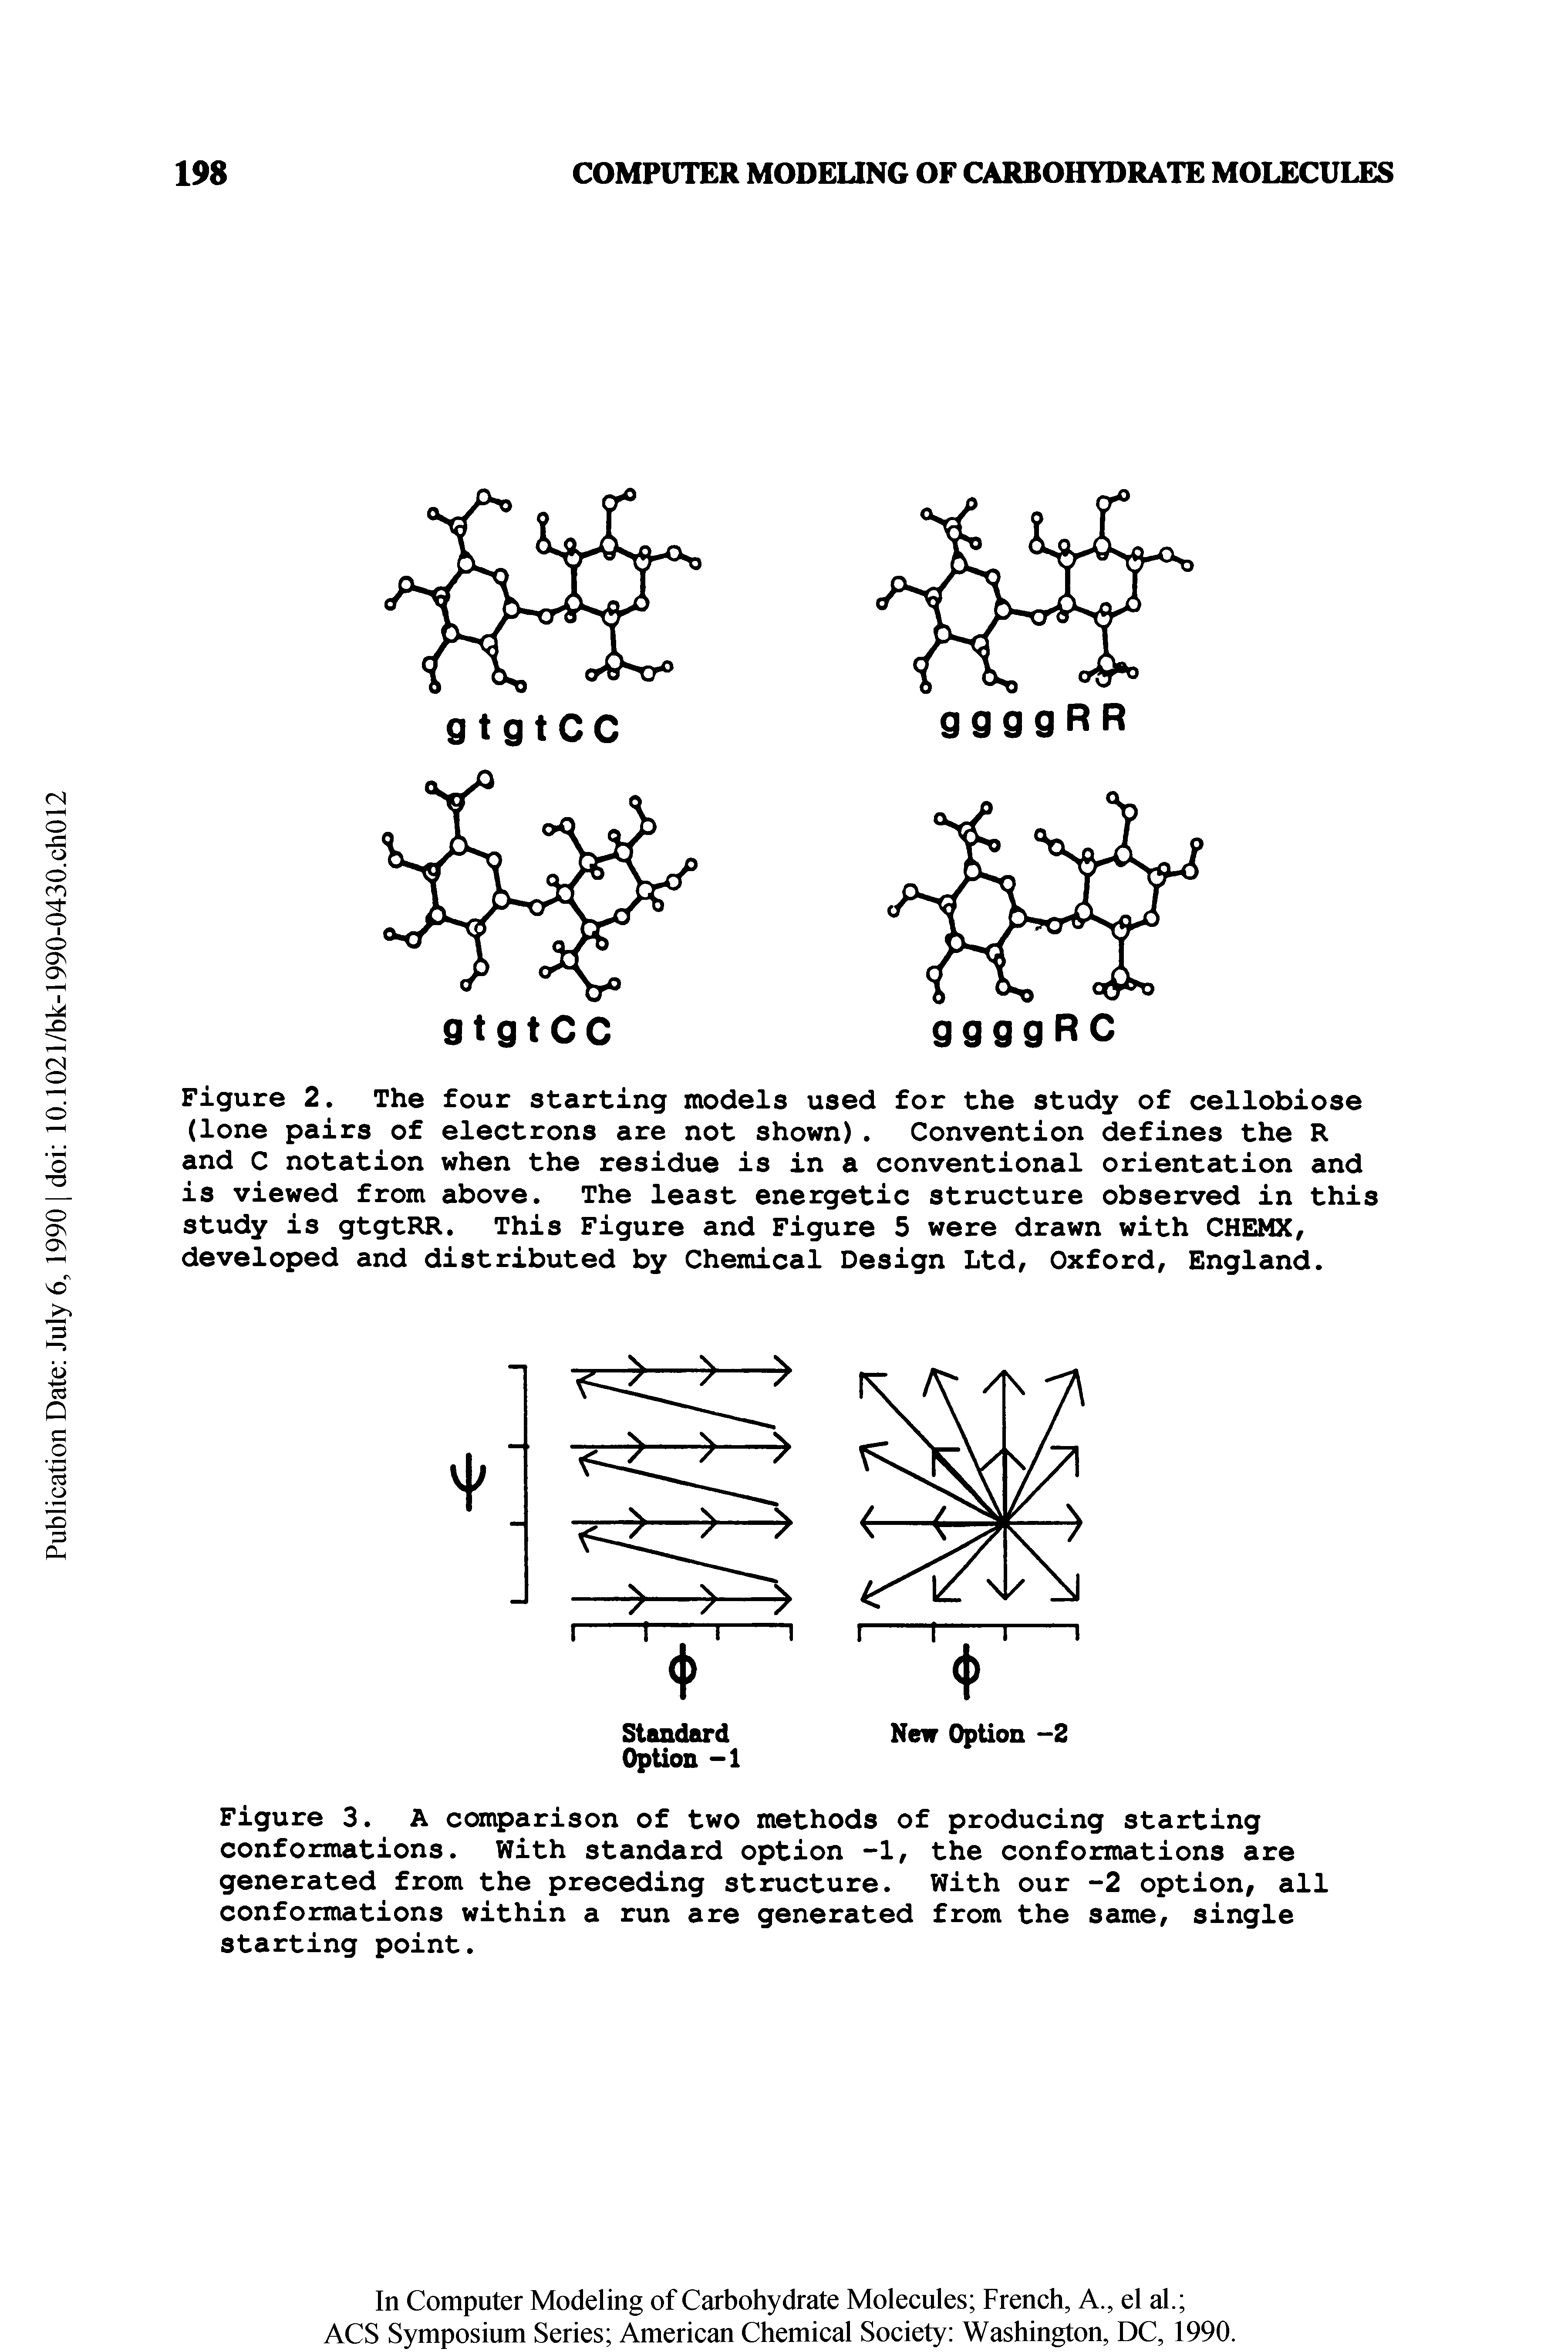 Figure 2. The four starting models used for the study of cellobiose (lone pairs of electrons are not shown). Convention defines the R and C notation when the residue is in a conventional orientation and is viewed from above. The least energetic structure observed in this study is gtgtRR. This Figure and Figure 5 were drawn with CHEMX, developed and distributed by Chemical Design Ltd, Oxford, England.